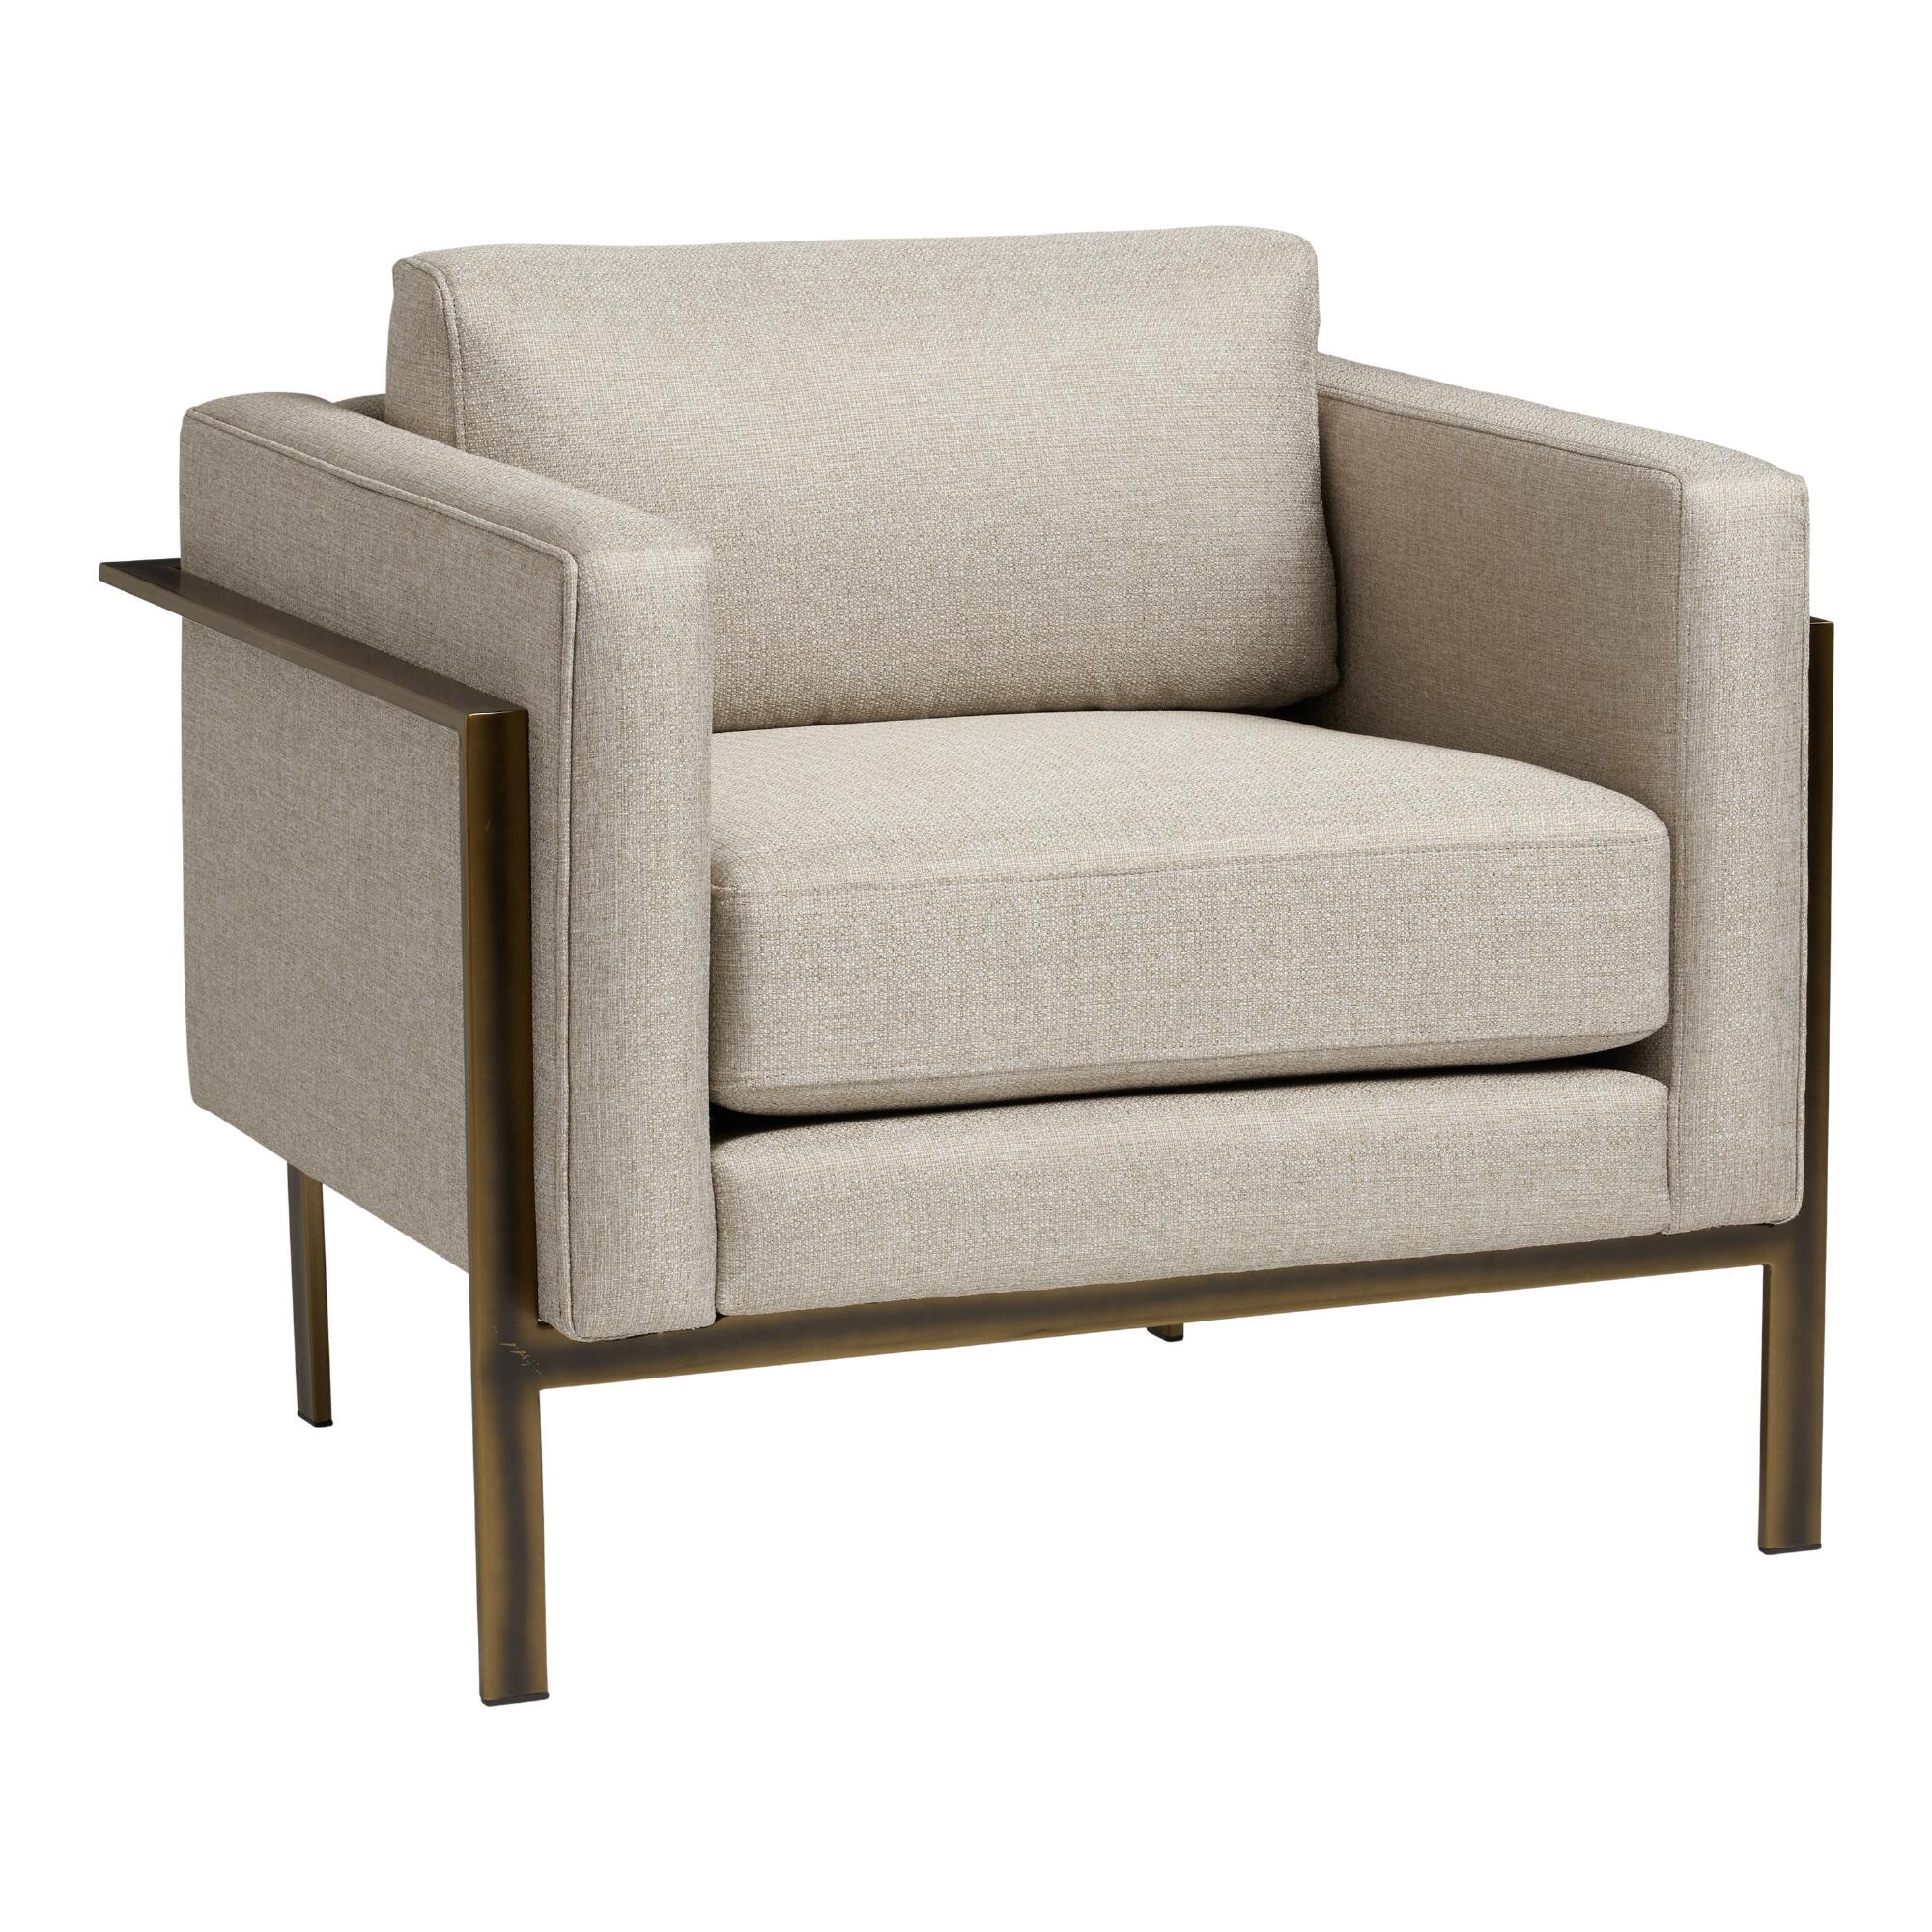 Bronze Metal and Taupe Nicklas Upholstered Chair: Brown - Polyester by World Market